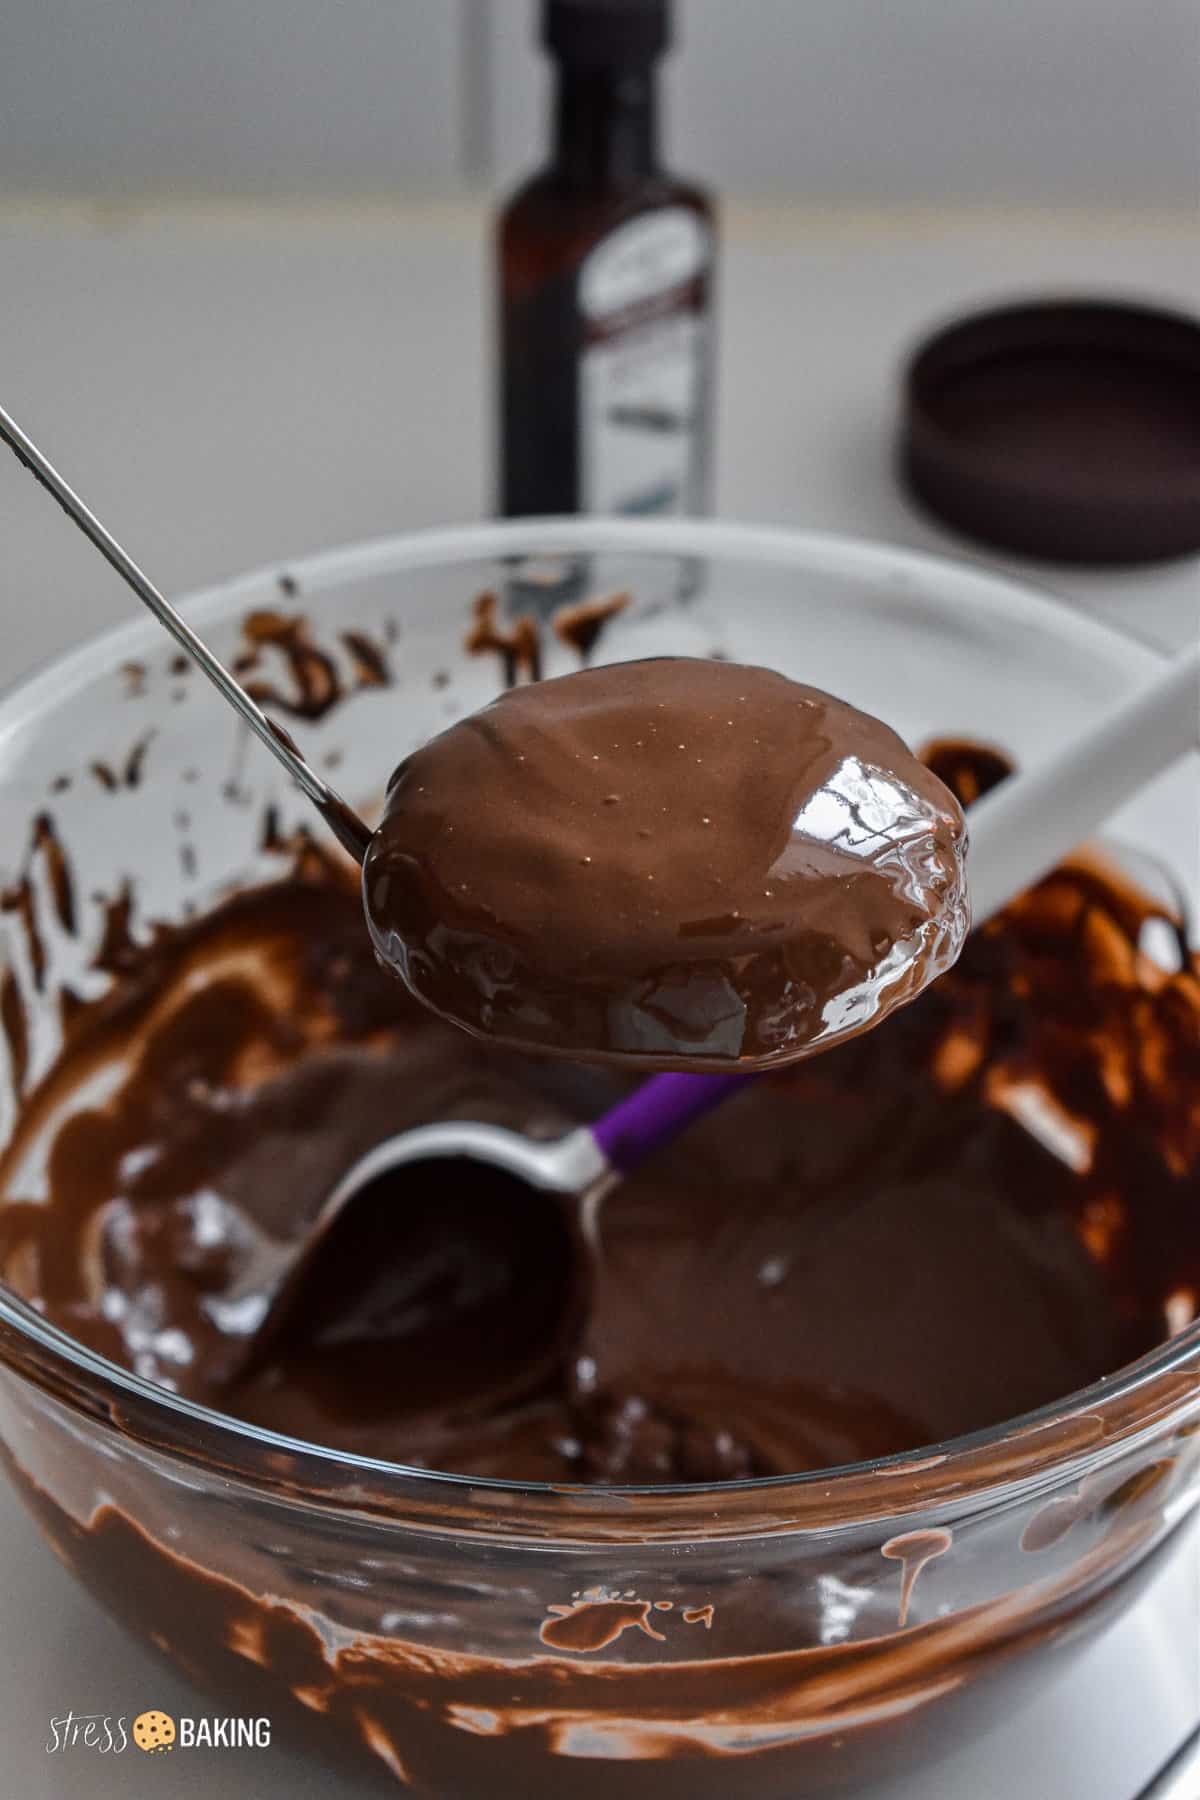 A cookie freshly coated in chocolate being held by a candy dipped above a bowl of melted chocolate